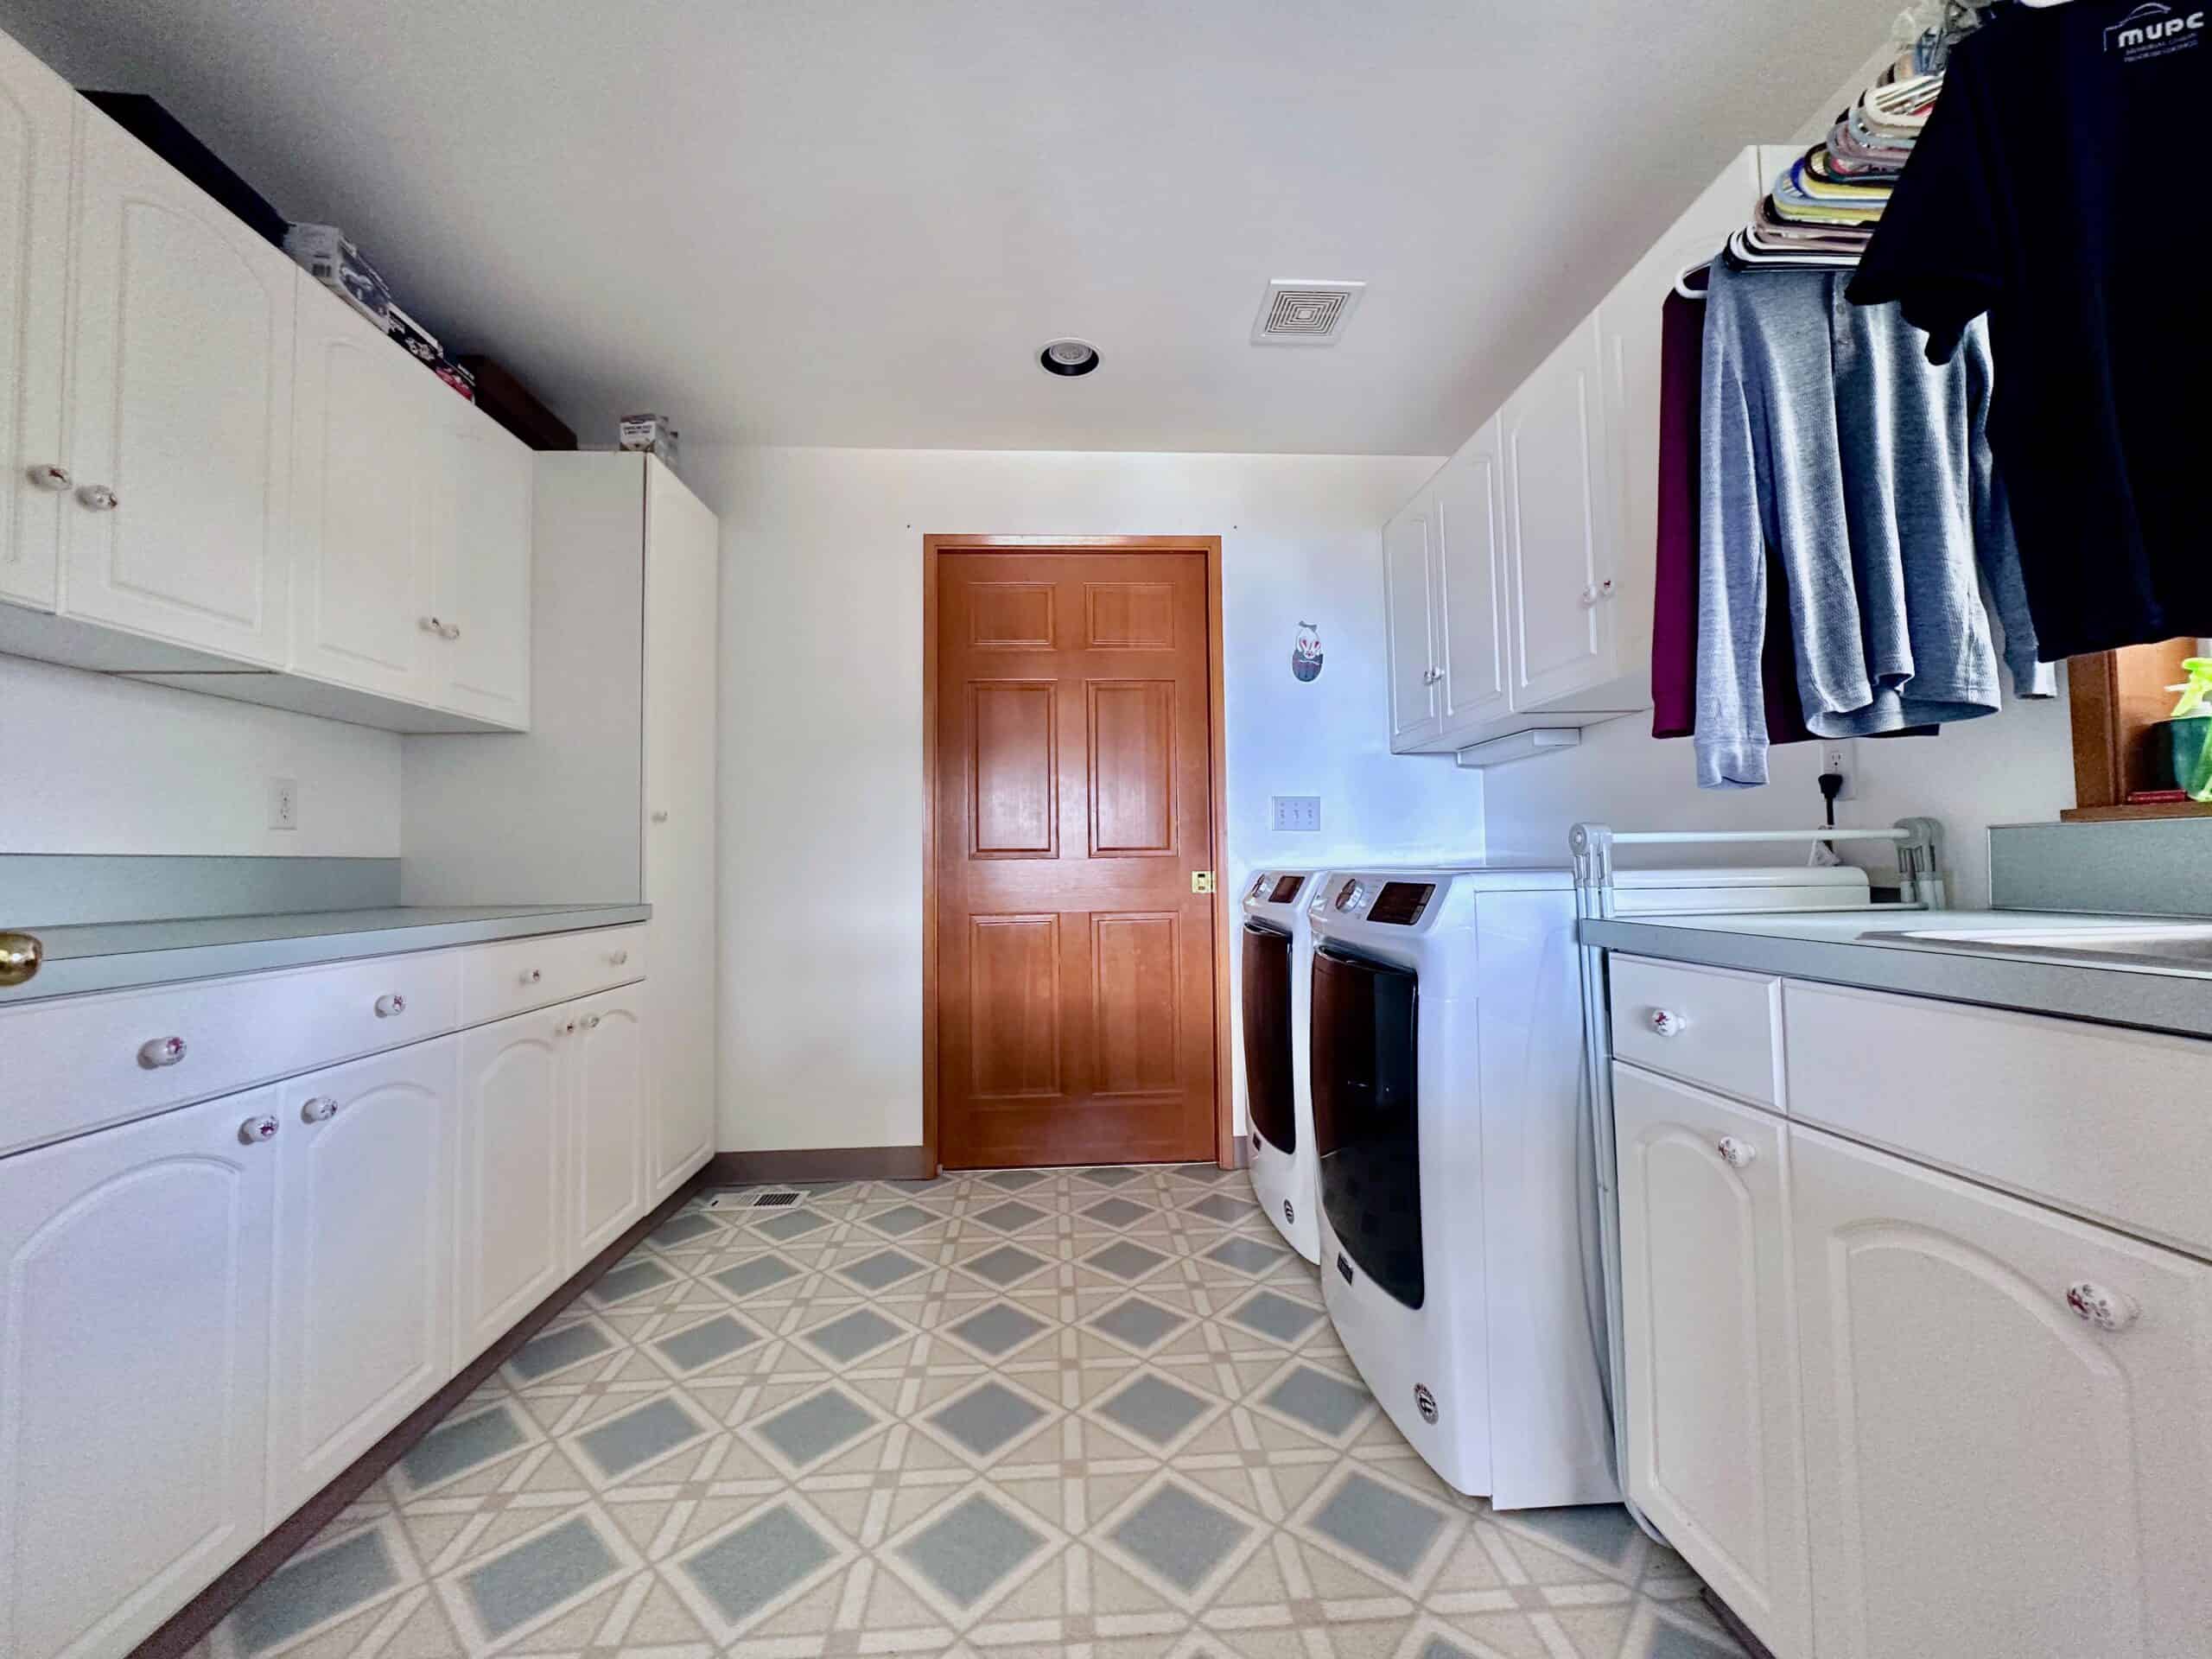 Laundry Room Cabinets and Storage